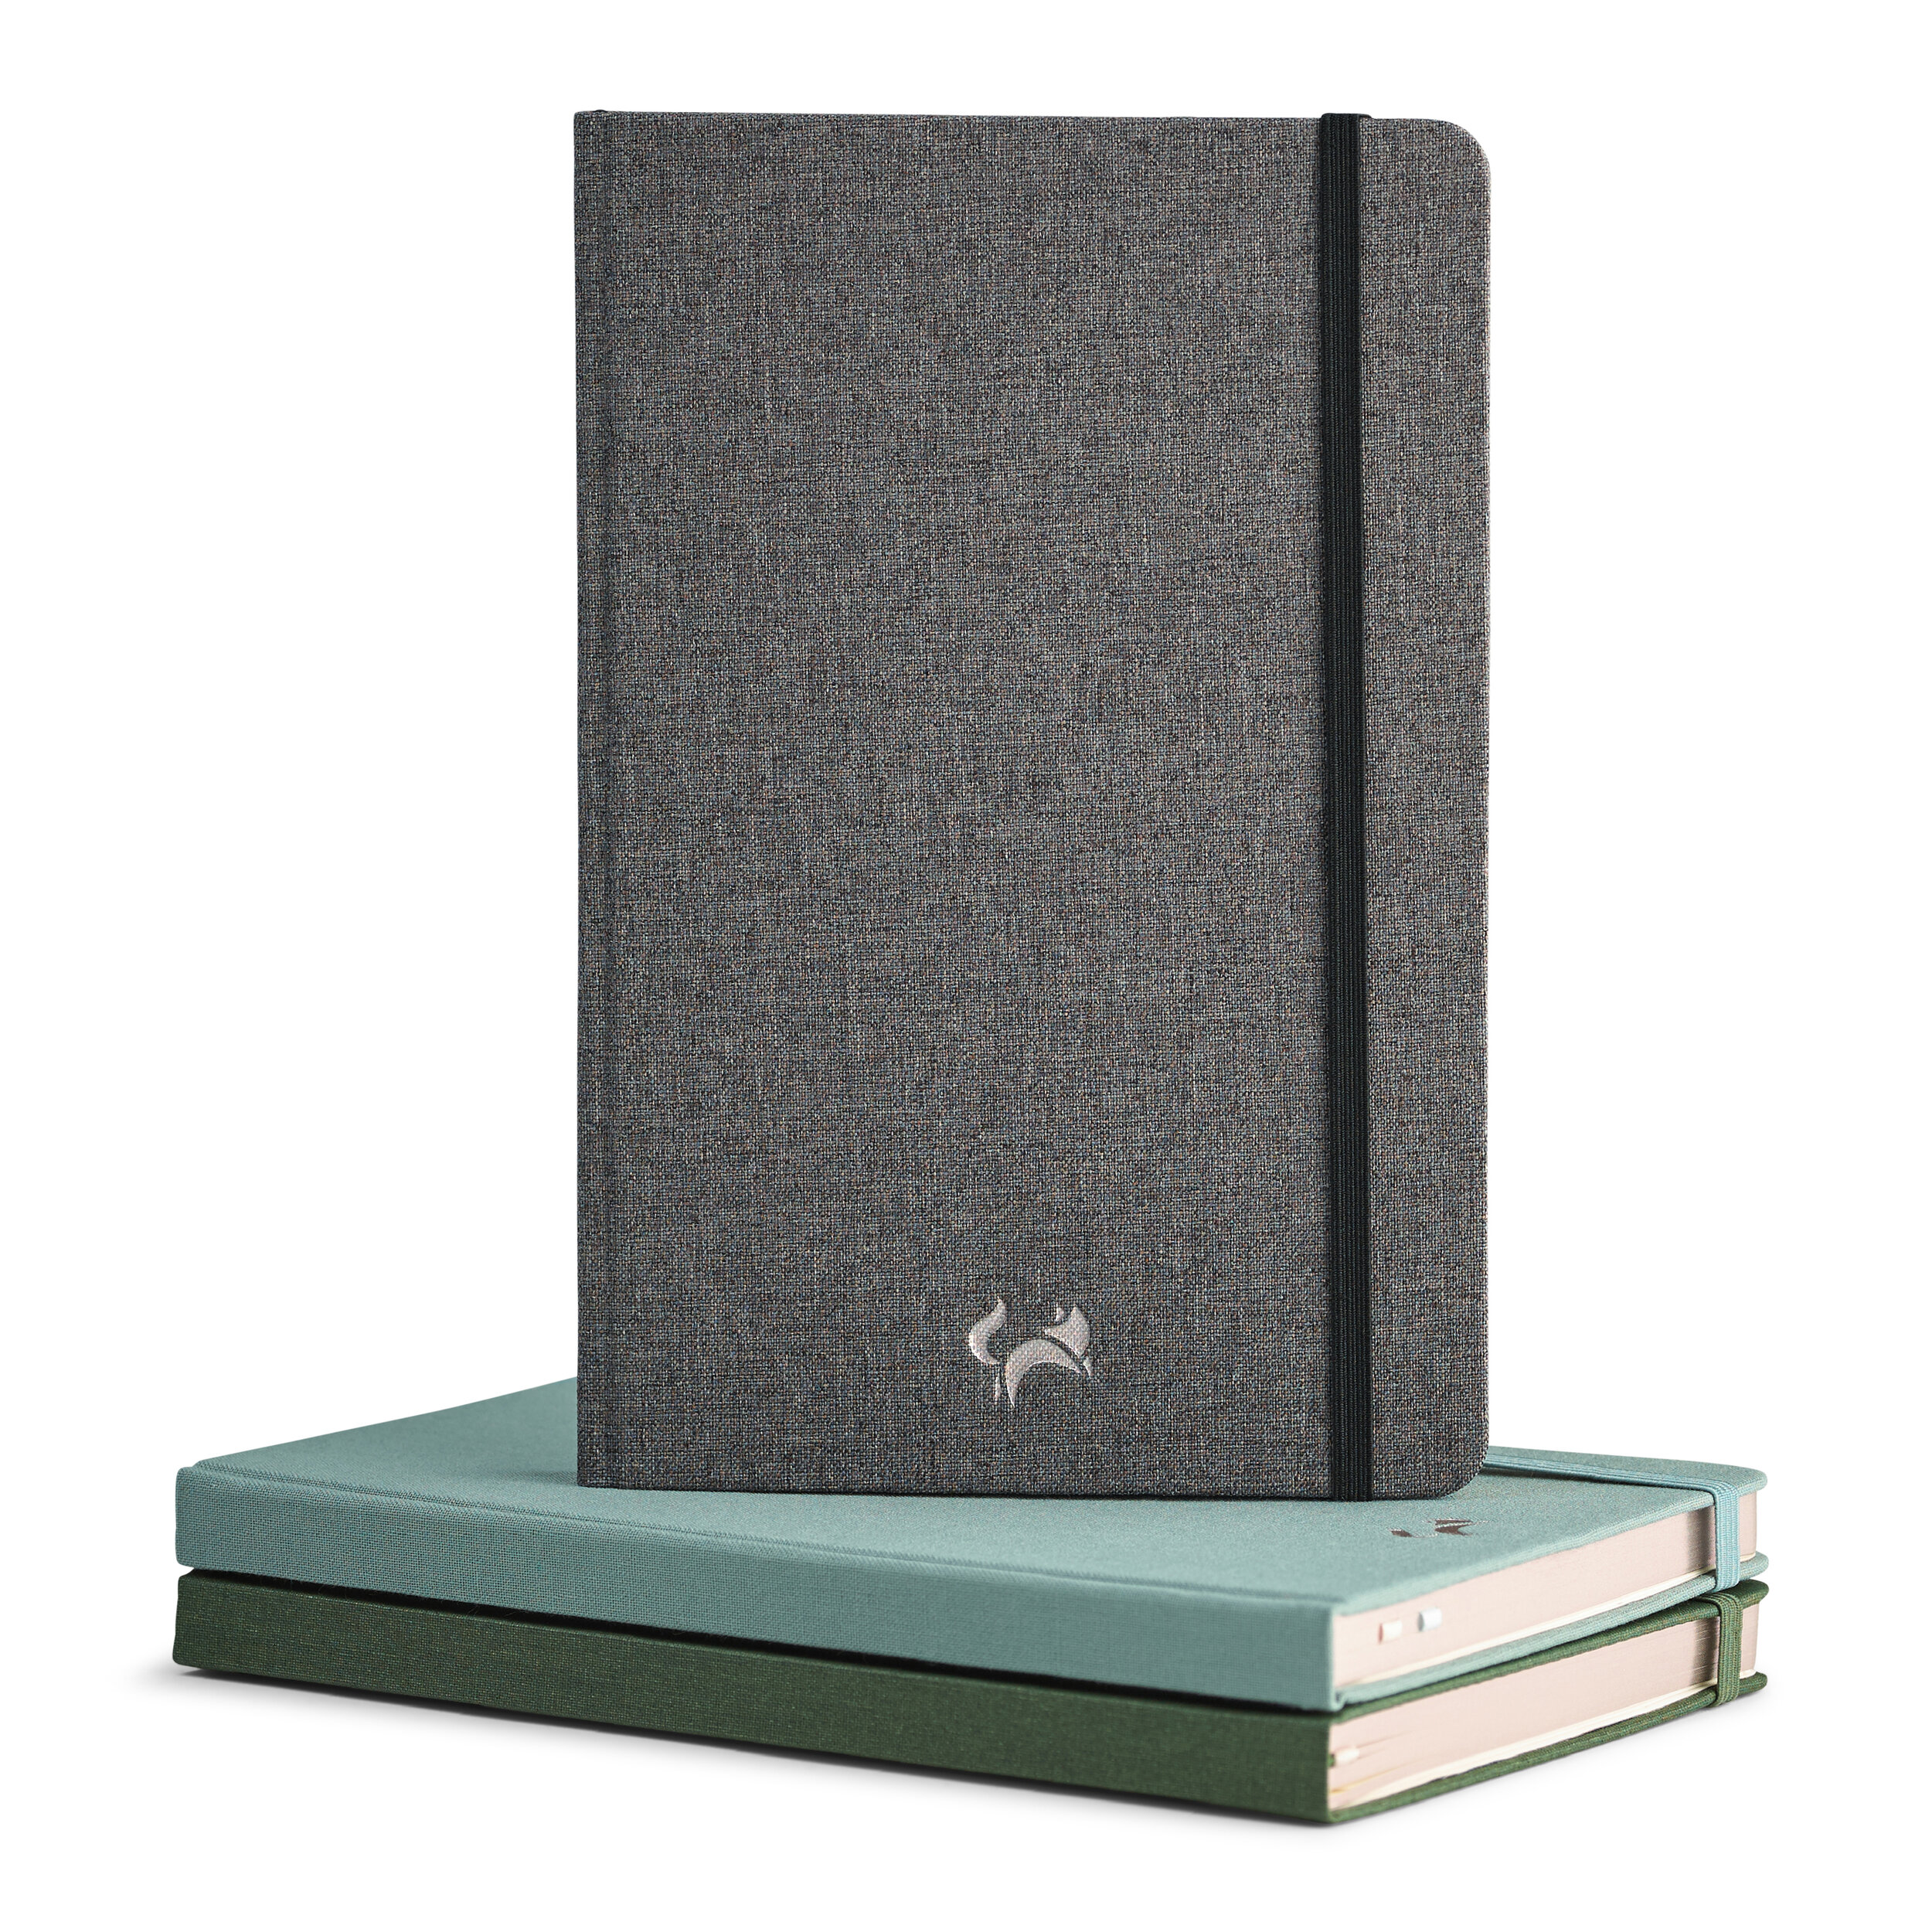 Inner Pocket Medium 5.6 x 8.4 inches 100gsm Quality Paper Olive Green Numbered Pages Unique Leatherette Jumping Fox Design Premium A5 Hardcover Lined Notebook Journal 